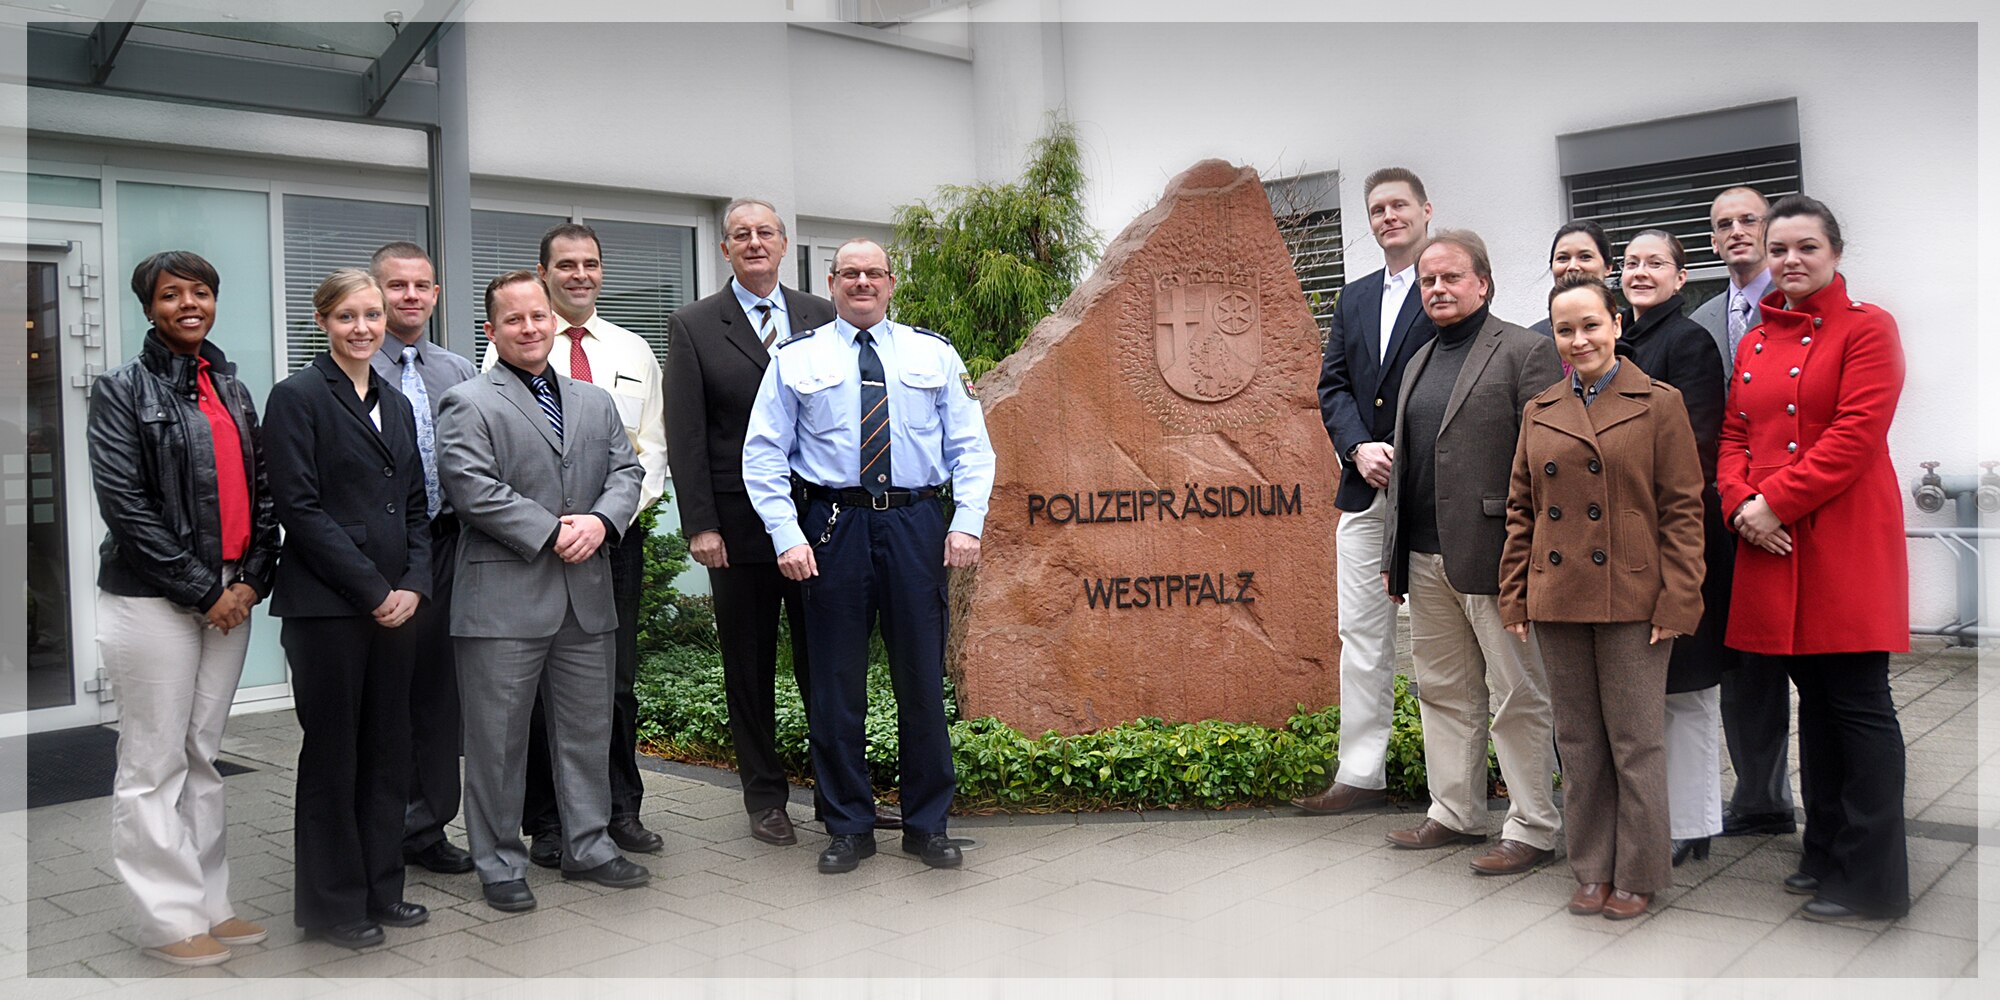 Air Force Office of Special Investigations 13th Field Investigations Squadron Kaiserslautern Fraud and Corruption Task Force members visited the German Police Presidium Westpfalz police station in Kaiserslautern to encourage future liaison opportunities. The German Chief of Police Wolfgang Erfurt, sixth from left, met with members from OSI's 13 FIS during their visit. OSI members around the world, whether stationed in the United States or otherwise, are always working on improving liaison relationships with their local law enforcement counterparts. (U.S. Air Force photo provided by the 13 FIS.)